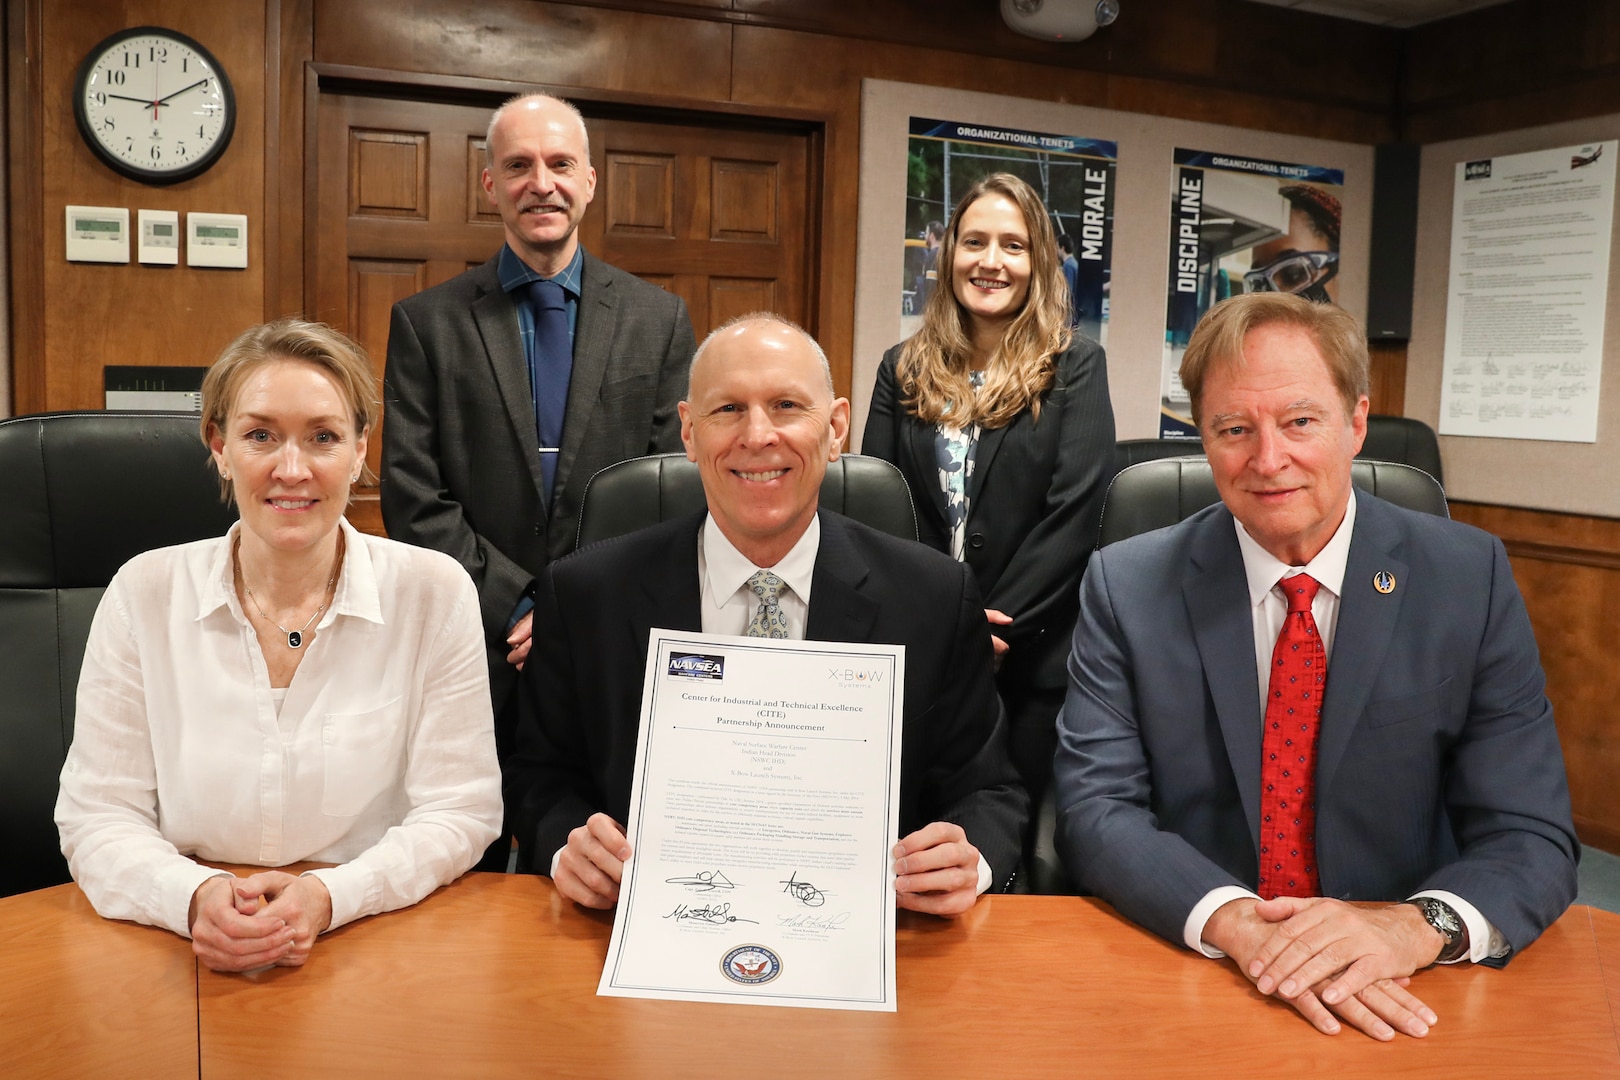 Naval Surface Warfare Center Indian Head (NSWC IHD) Technical Director Ashley Johnson (front center) displays a signed new public-private partnership agreement with X-Bow Launch Systems Inc., co-founder and Chief Revenue Officer Maureen Gannon (front left) and co-founder and Chairman of the Board Mark Kaufman (front right) during a March 24 signing ceremony. Also pictured are Deputy Technical Director Steve Anthony (back left) and Explosives and Energetics Division Director Bernadette Wackerle.